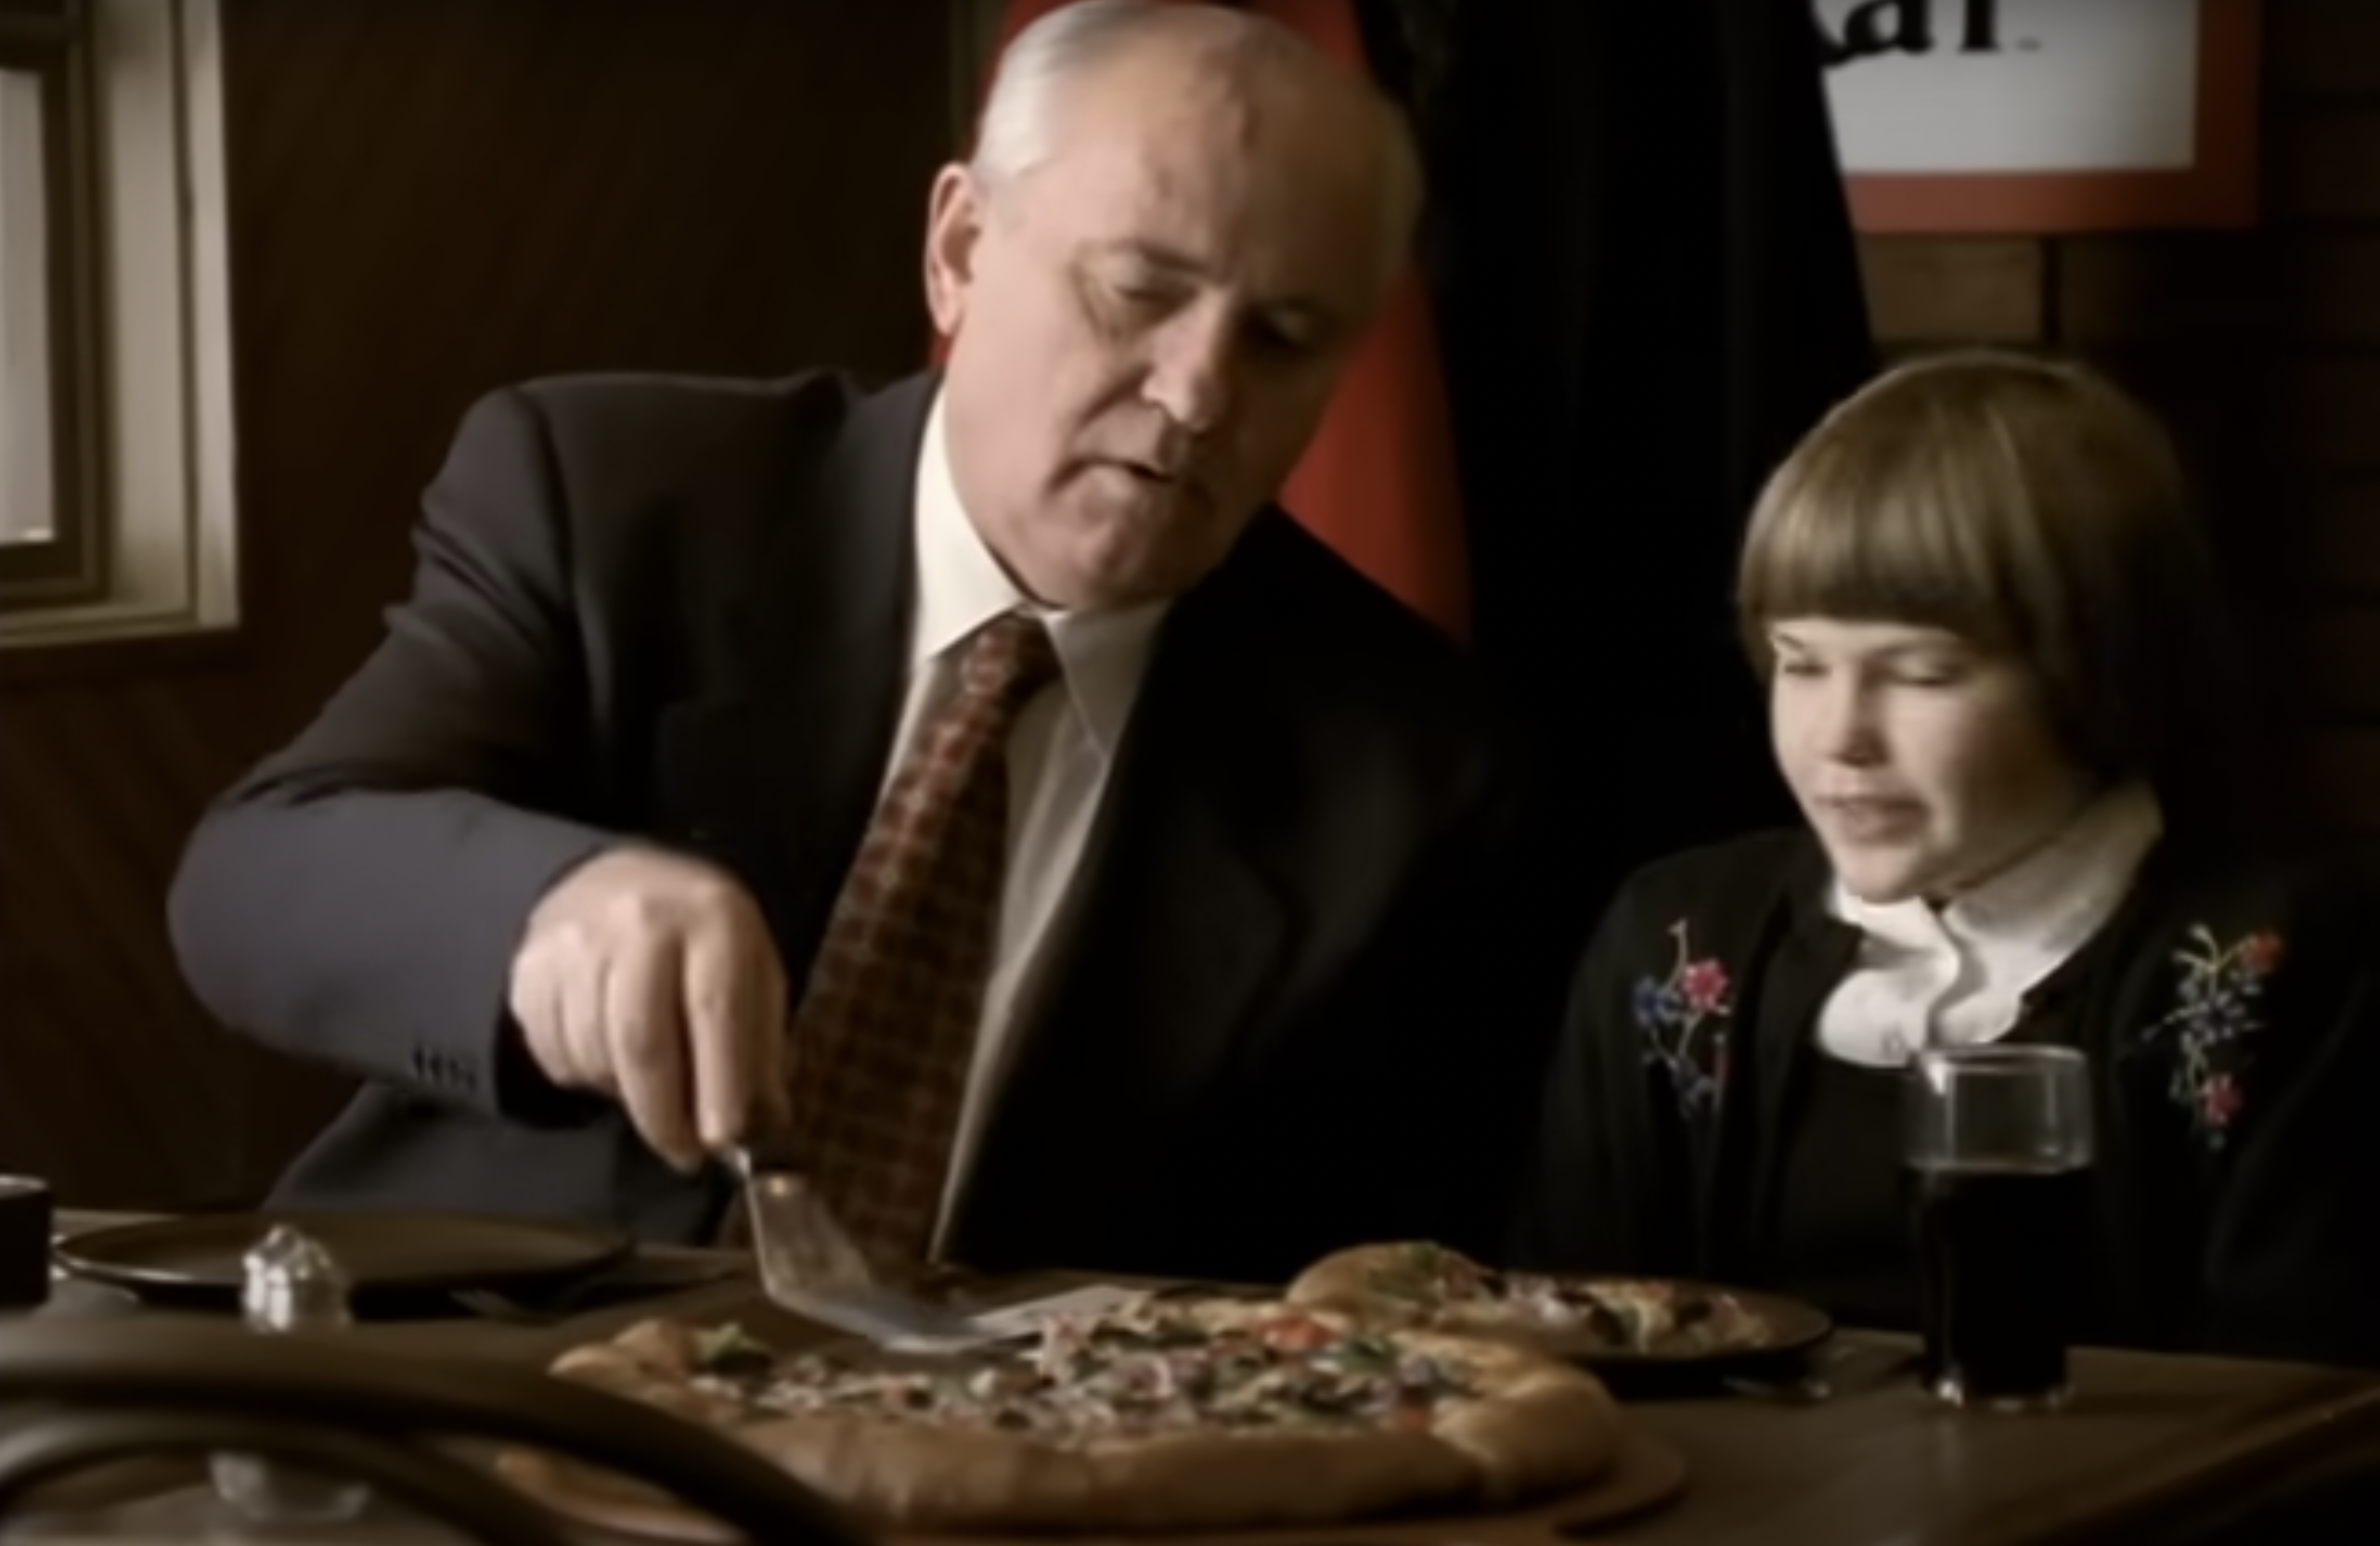 Remembering Gorbachev's iconic Pizza Hut commercial